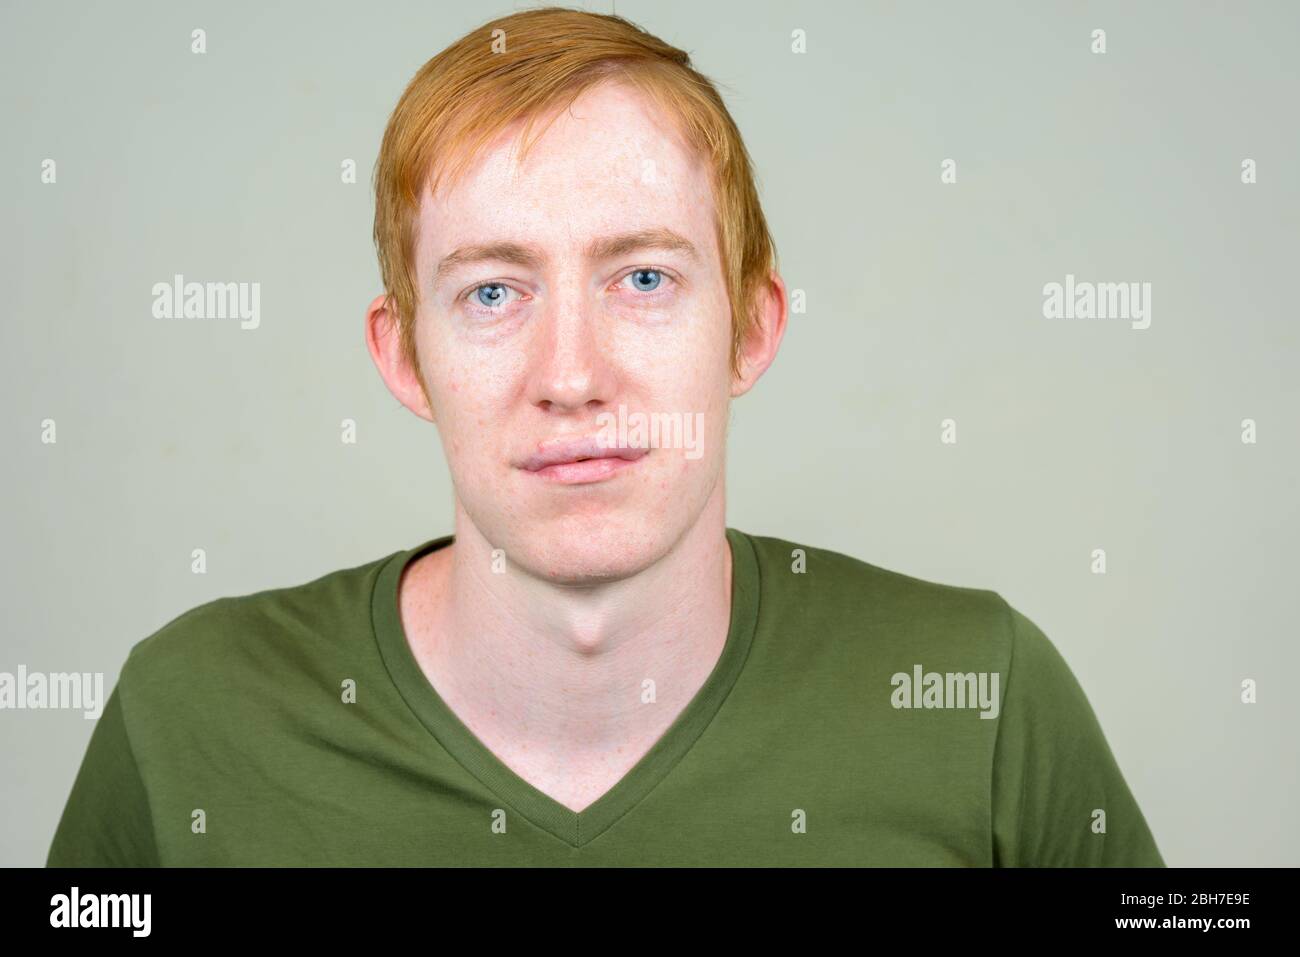 Face of man with red hair looking at camera Stock Photo